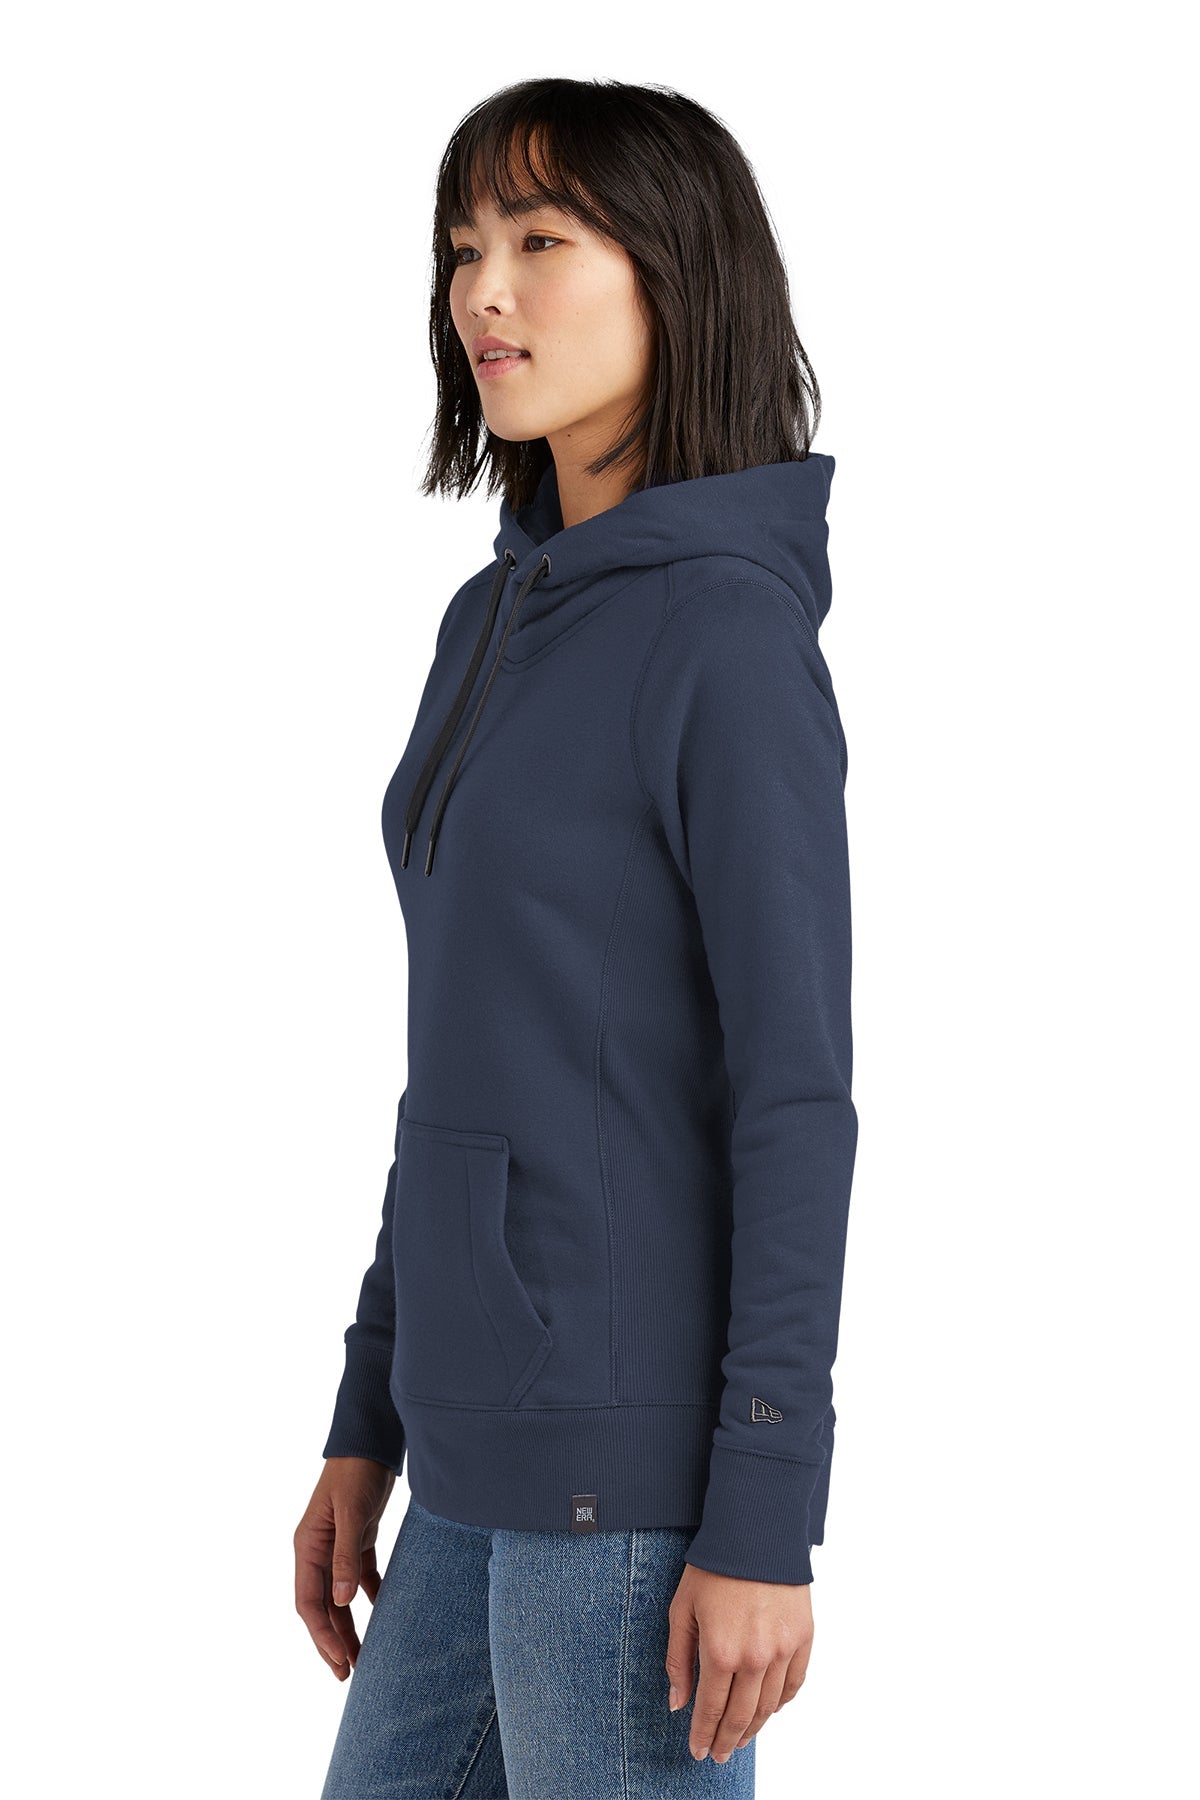 New Era Ladies French Terry Pullover Hoodie True Navy